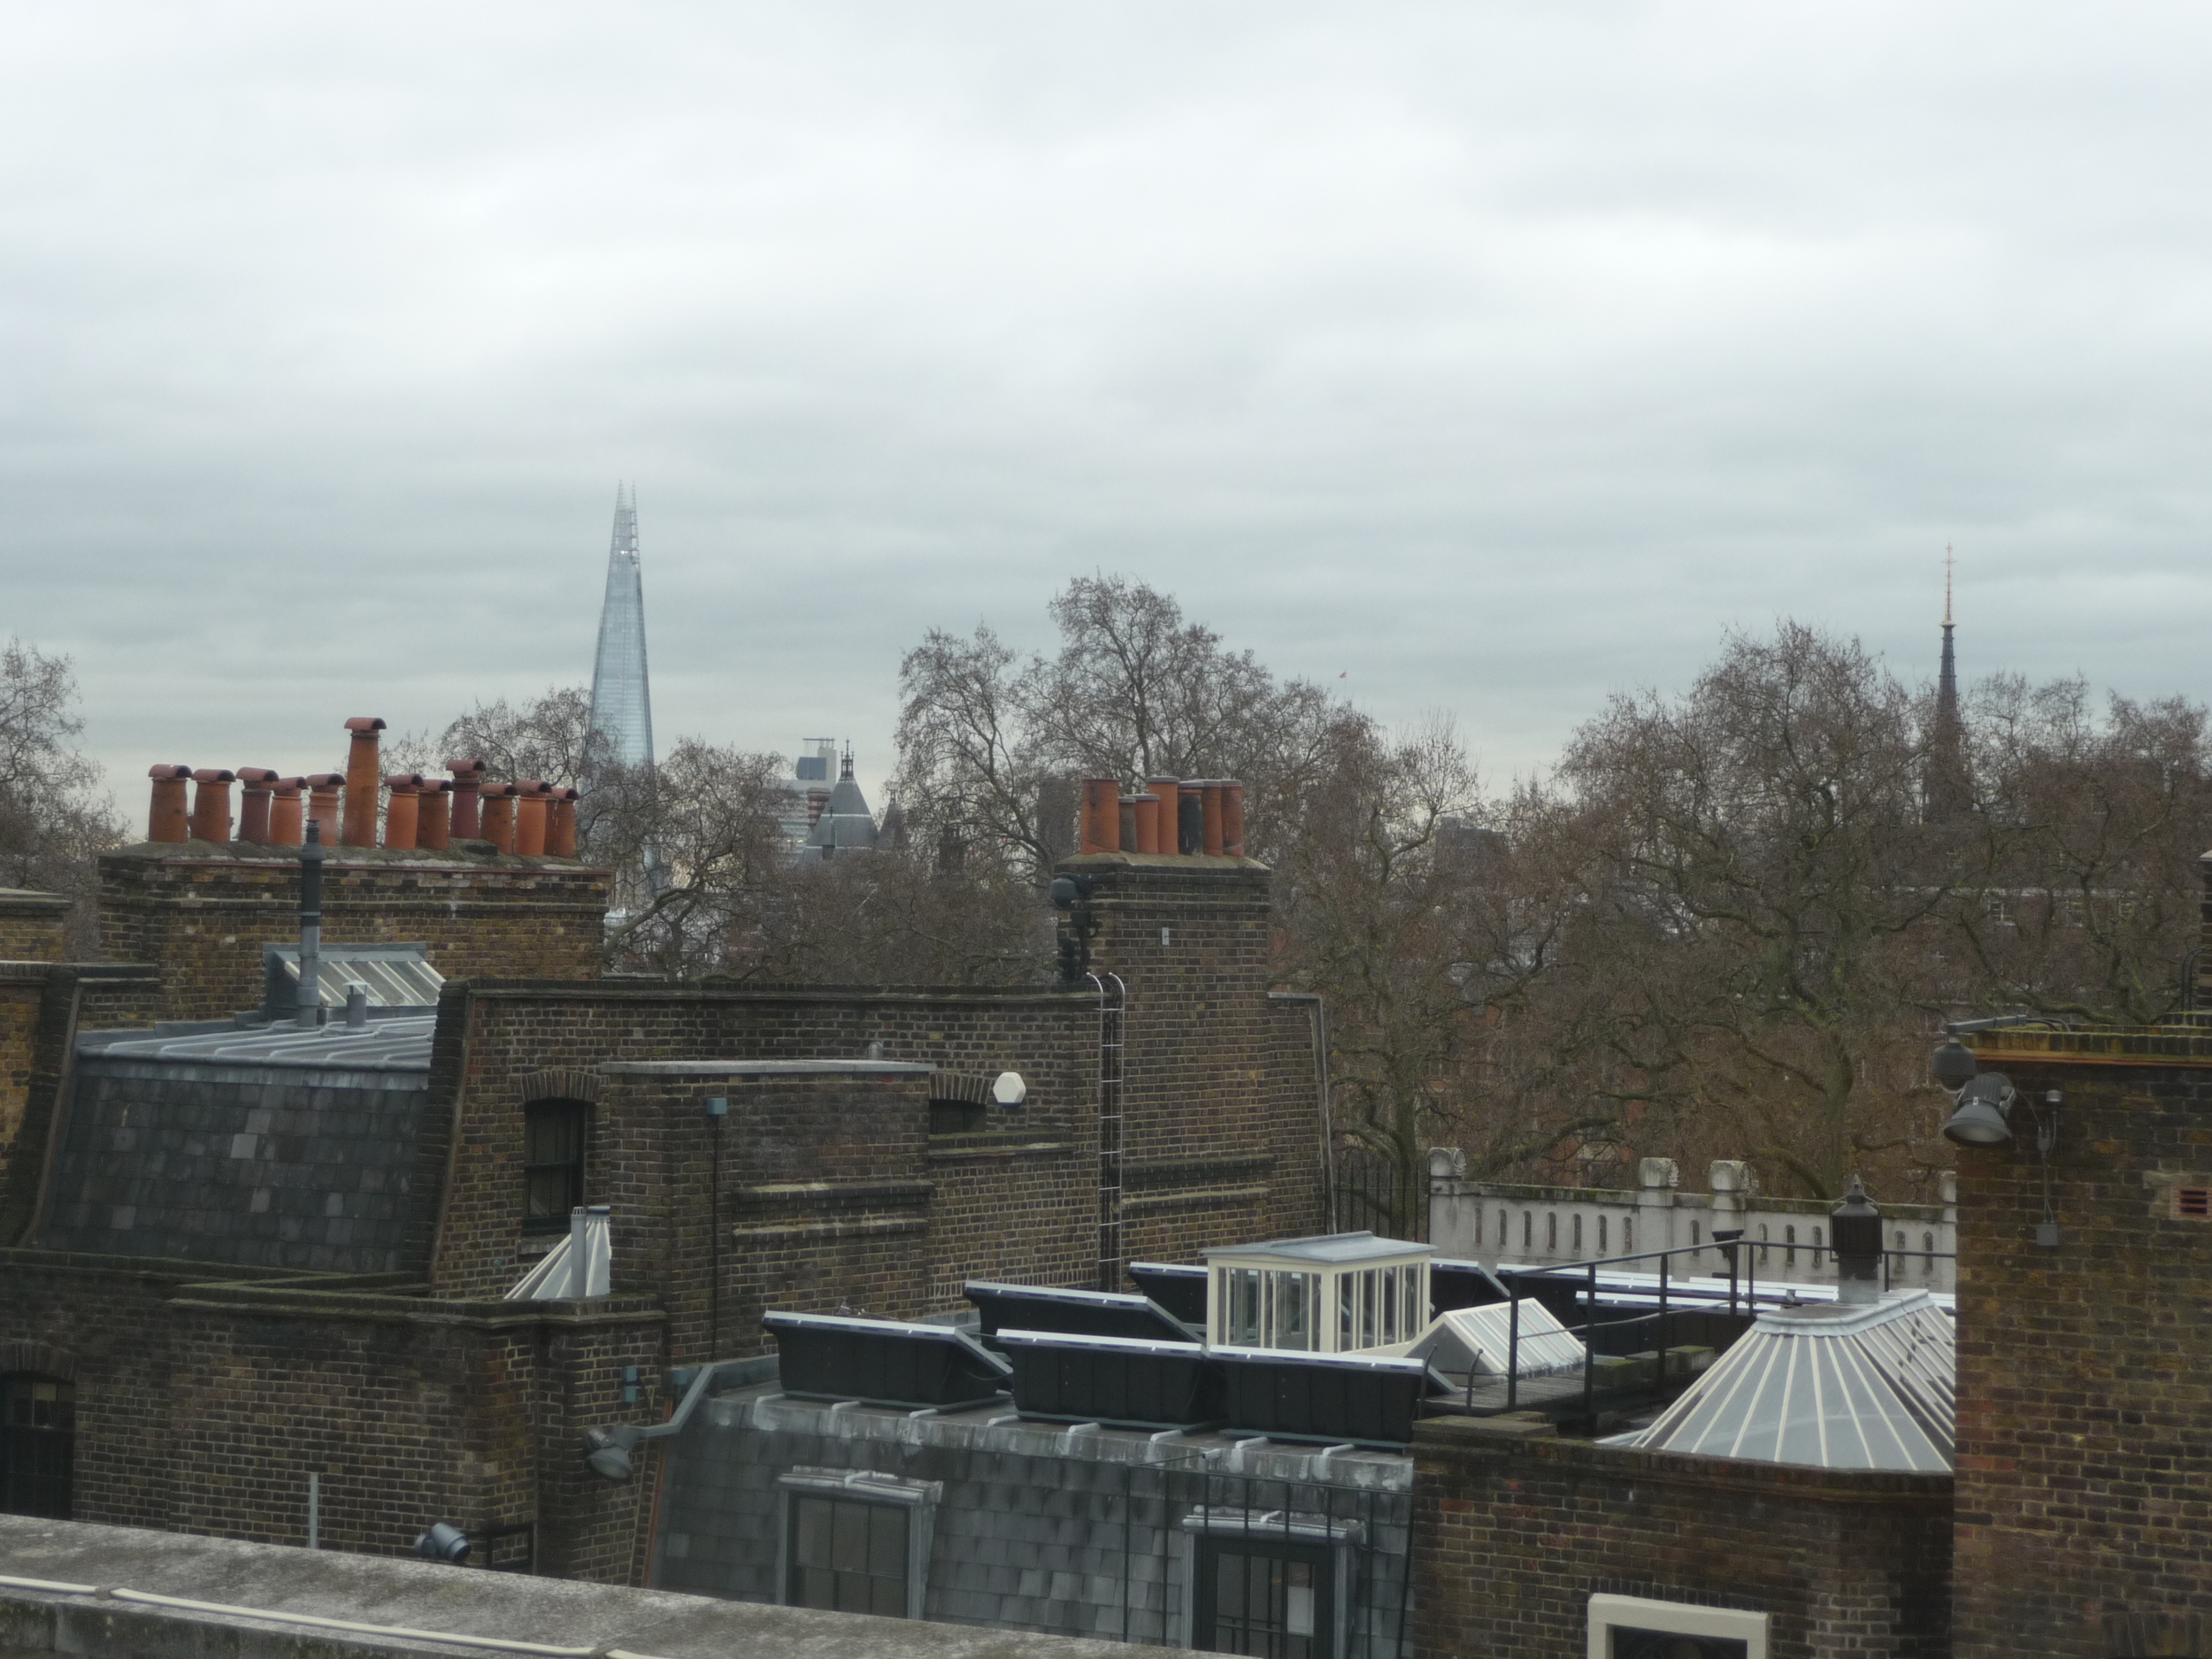  View from my hotel window with The Shard in the distance 